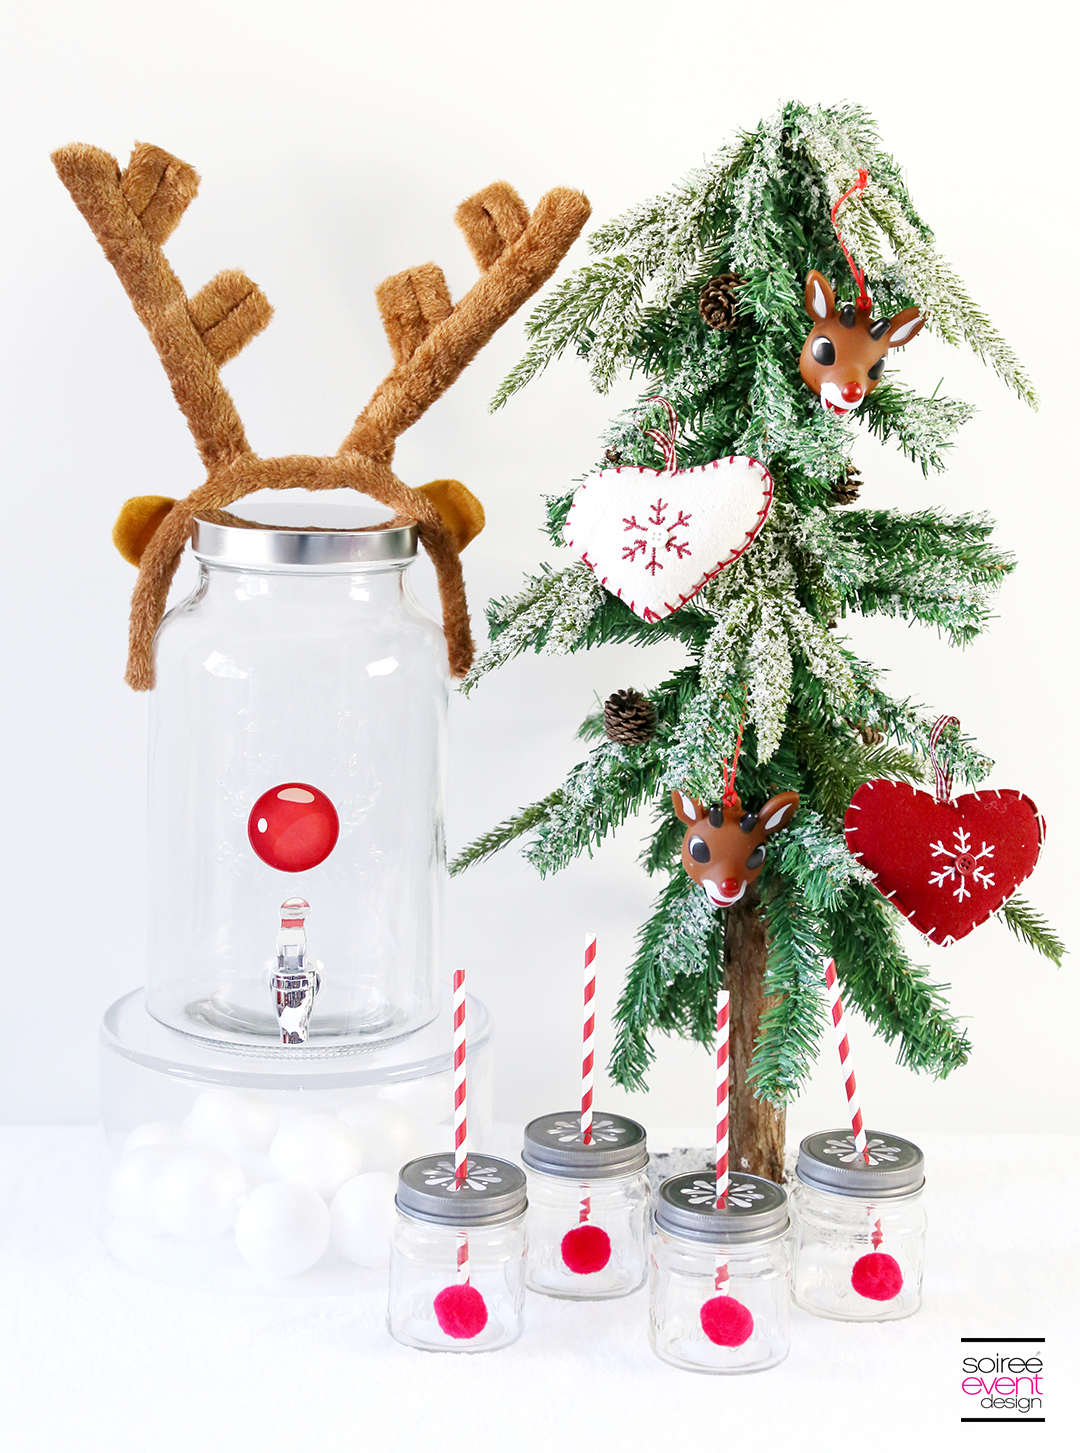 How to Make a Rudolph Party Drink Station + Giveaway - Soiree Event Design